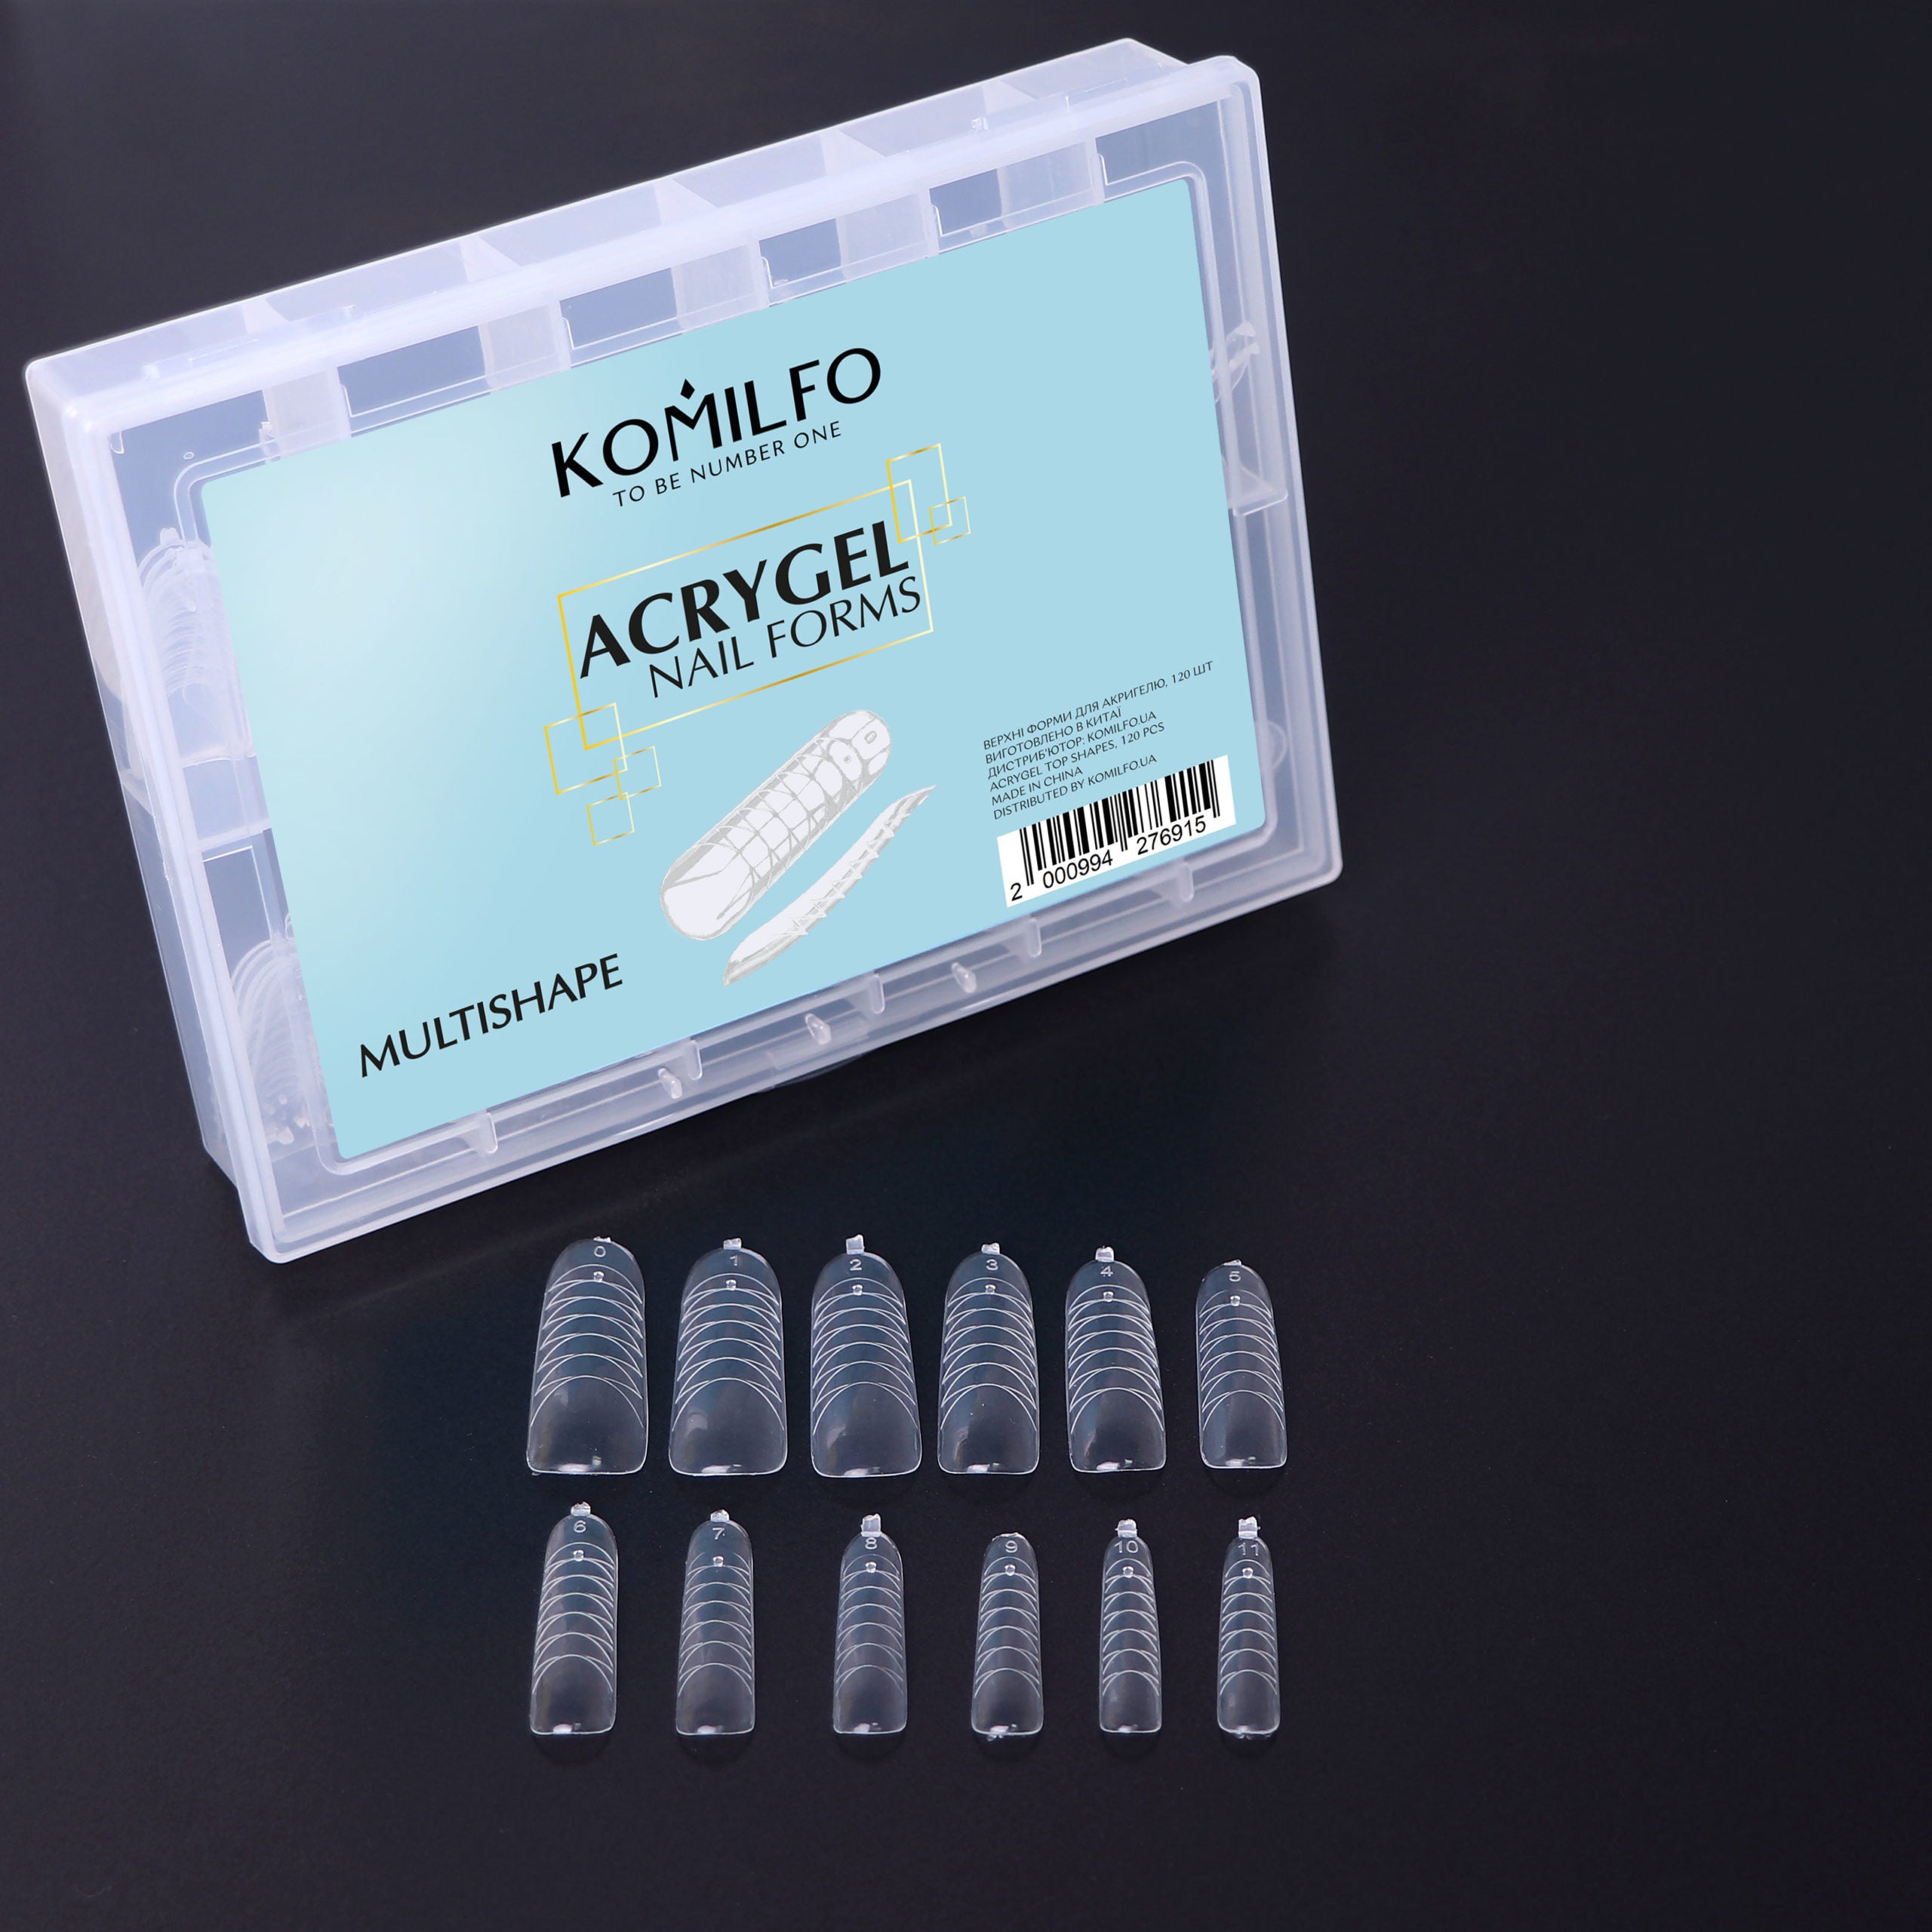 KOMILFO ACRY GEL TOP NAIL FORMS, MULTISHAPE. TOP FORMS FOR BUILDING, UNIVERSAL, 120 PIECES  456062